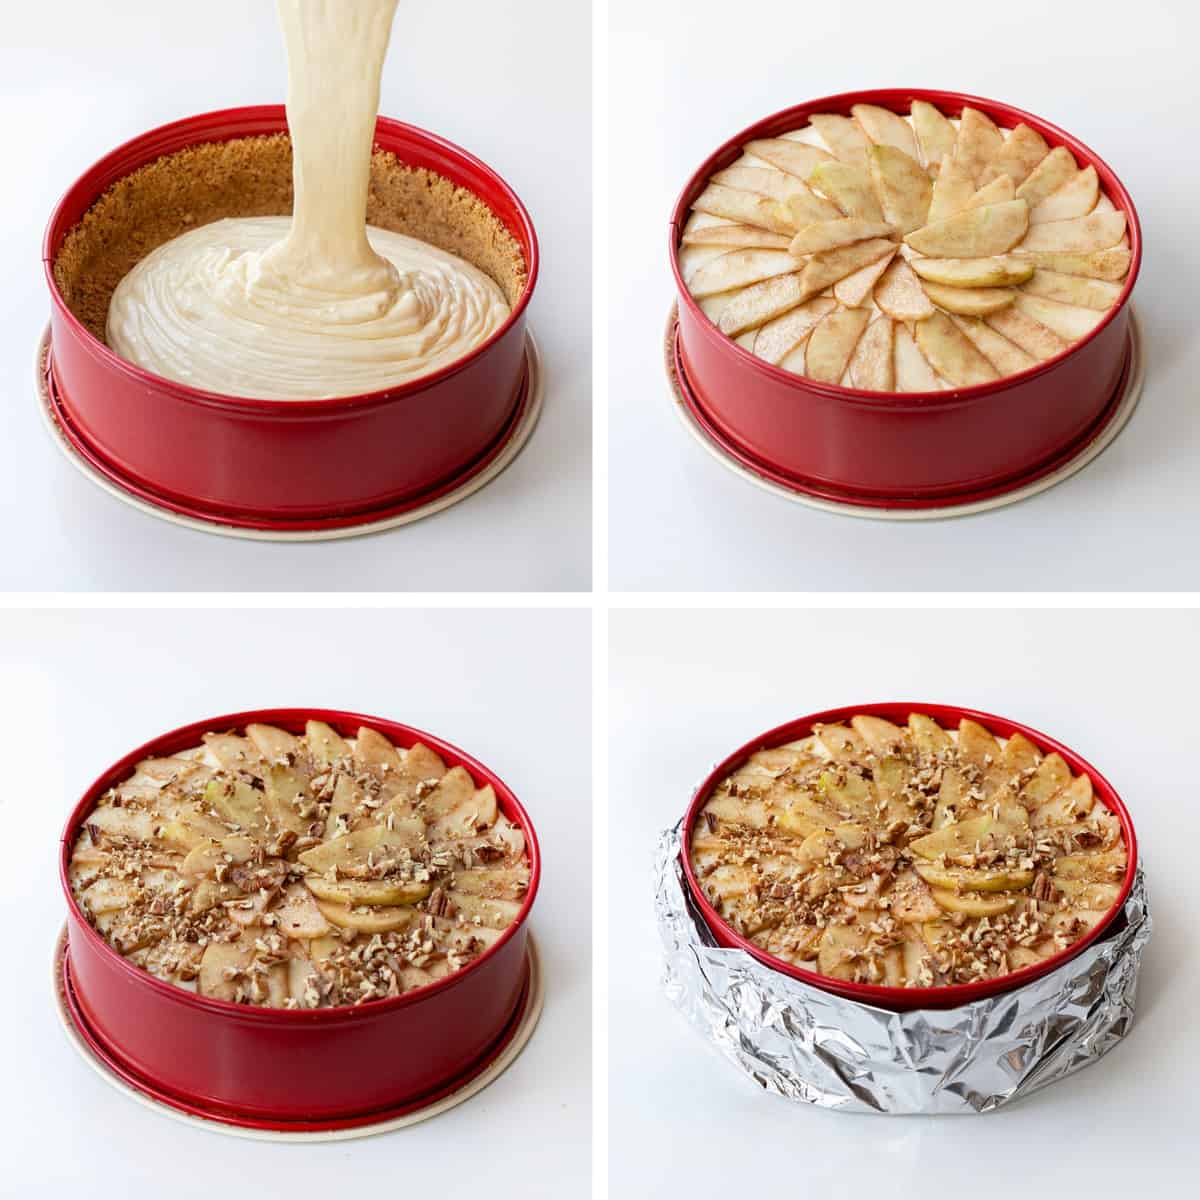 Adding Cheesecake Filling to Pan With Graham Cracker Crumbs, Adding Sliced Apples to the Top, Adding Nuts on top of the Apples, and Wrapping the Pan before Baking.